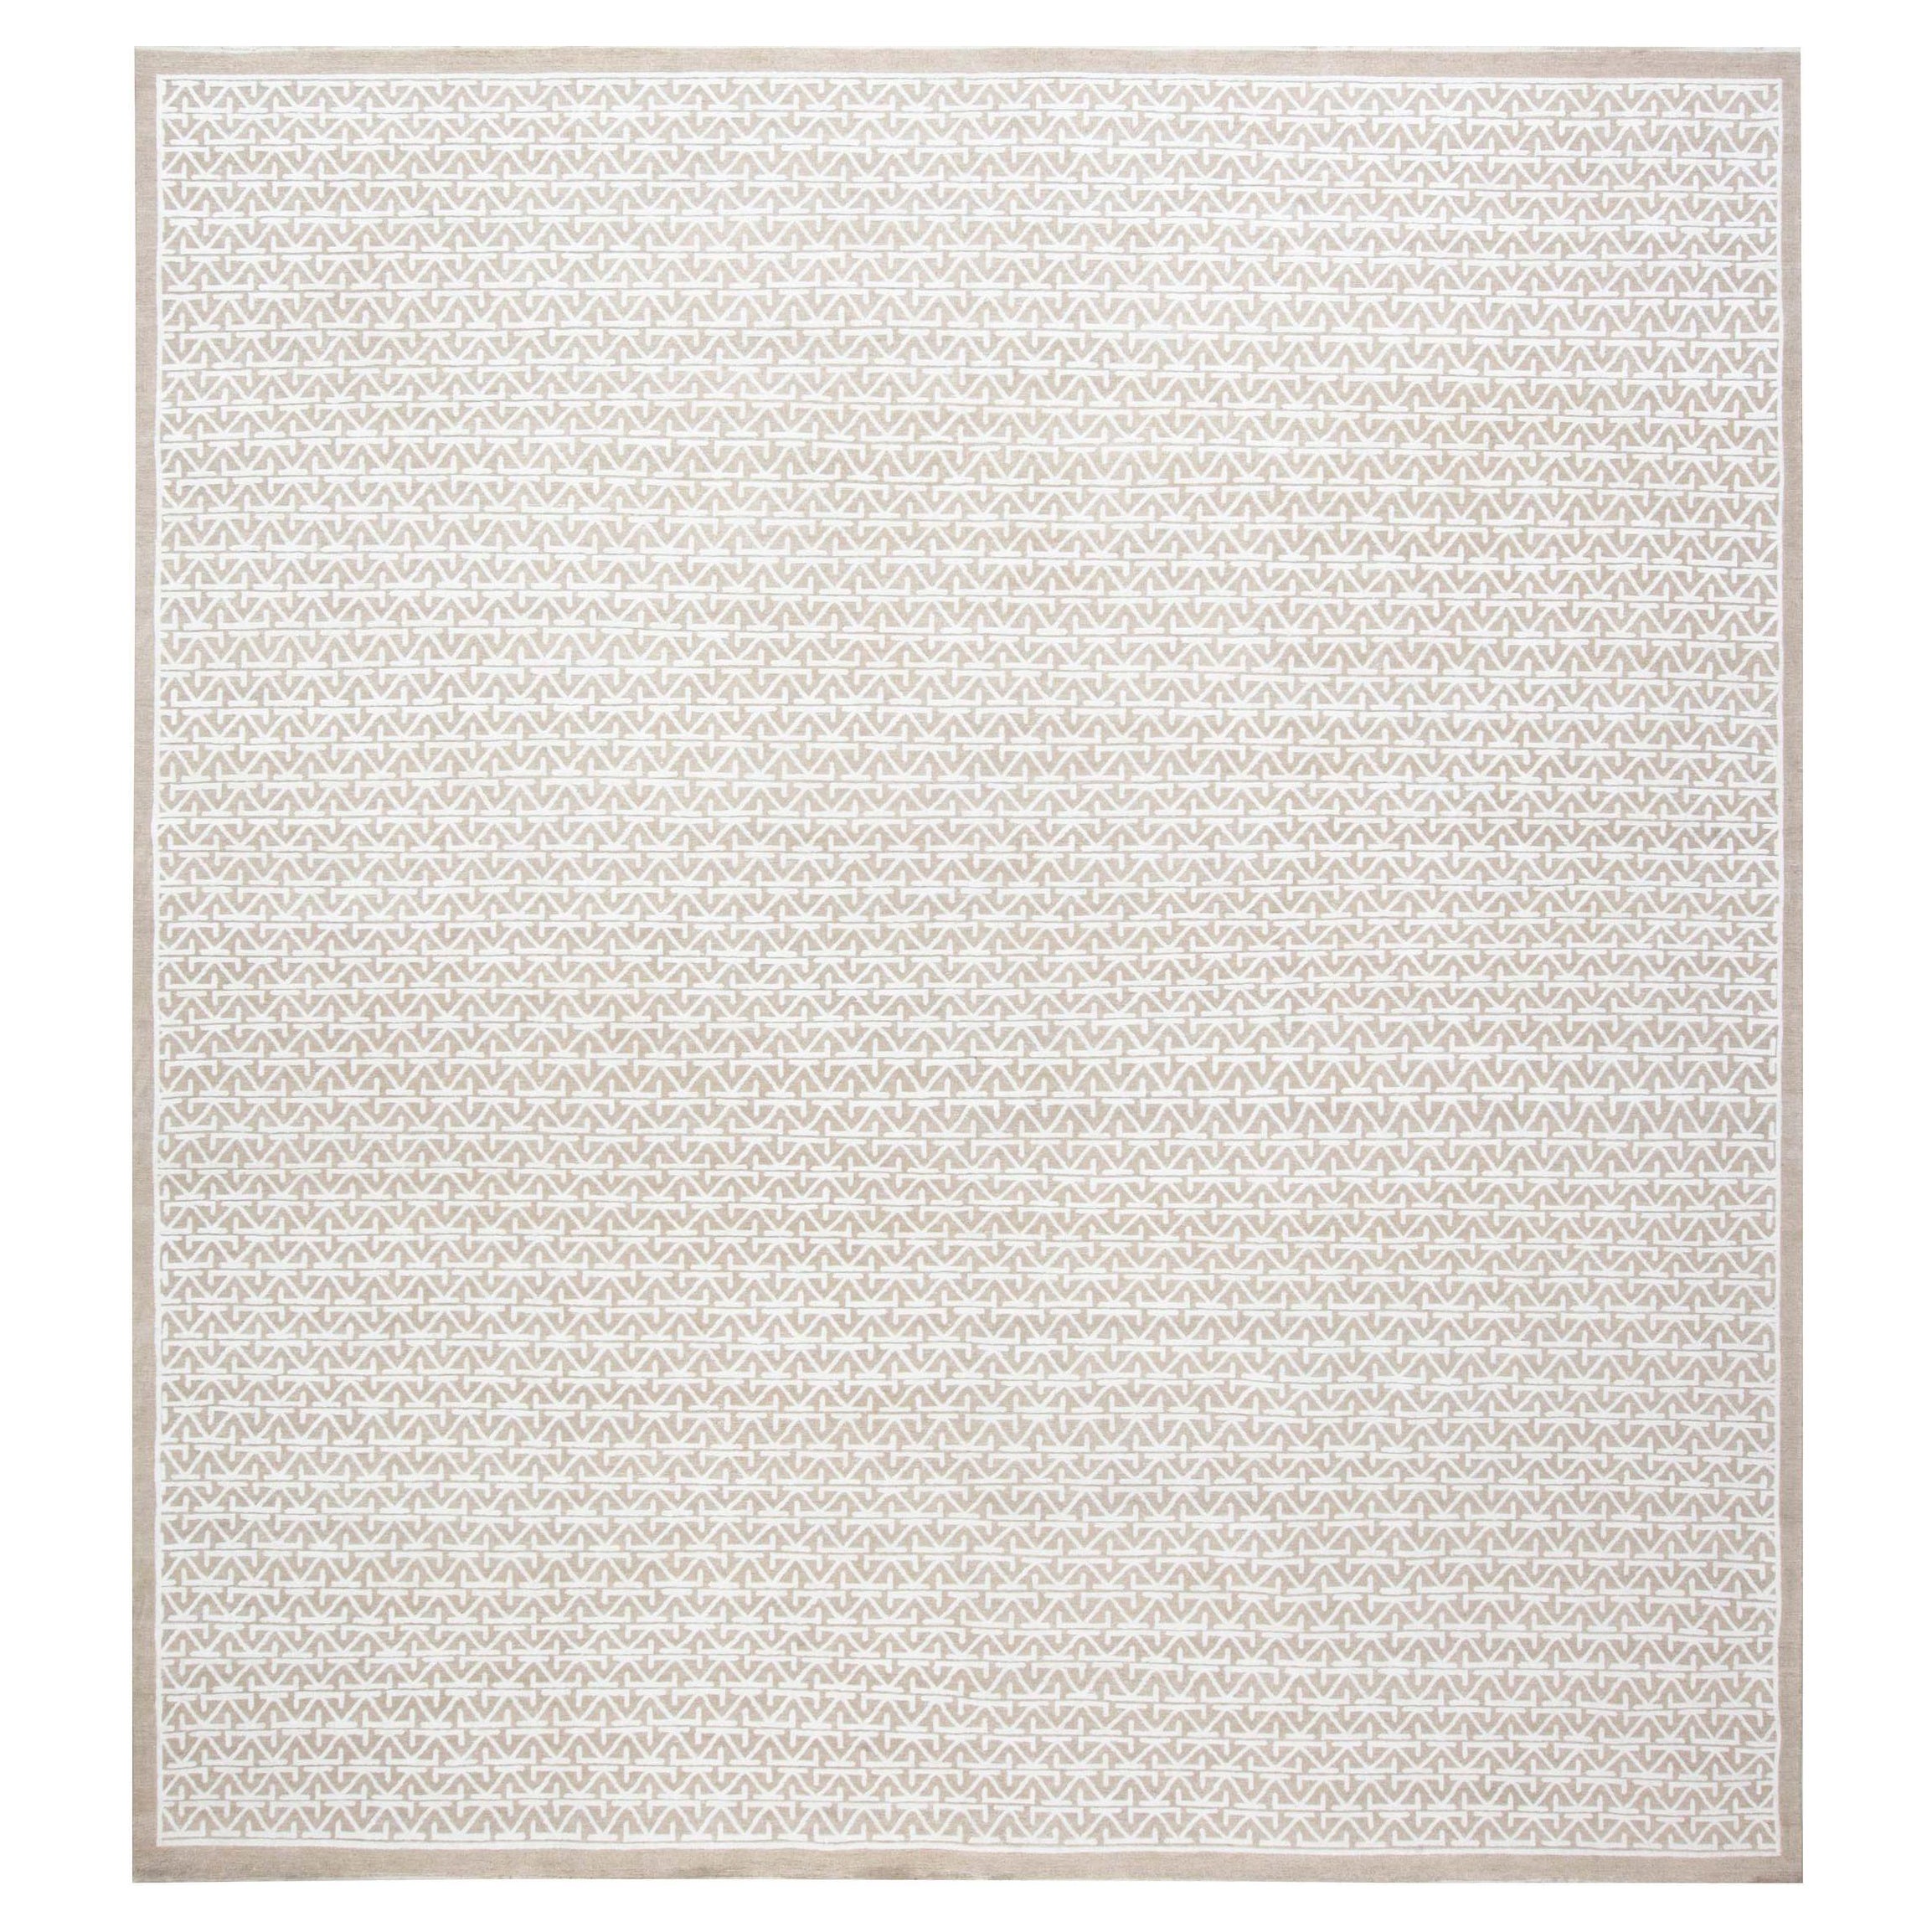 Contemporary Oriental Inspired Beige and White Rug by Doris Leslie Blau